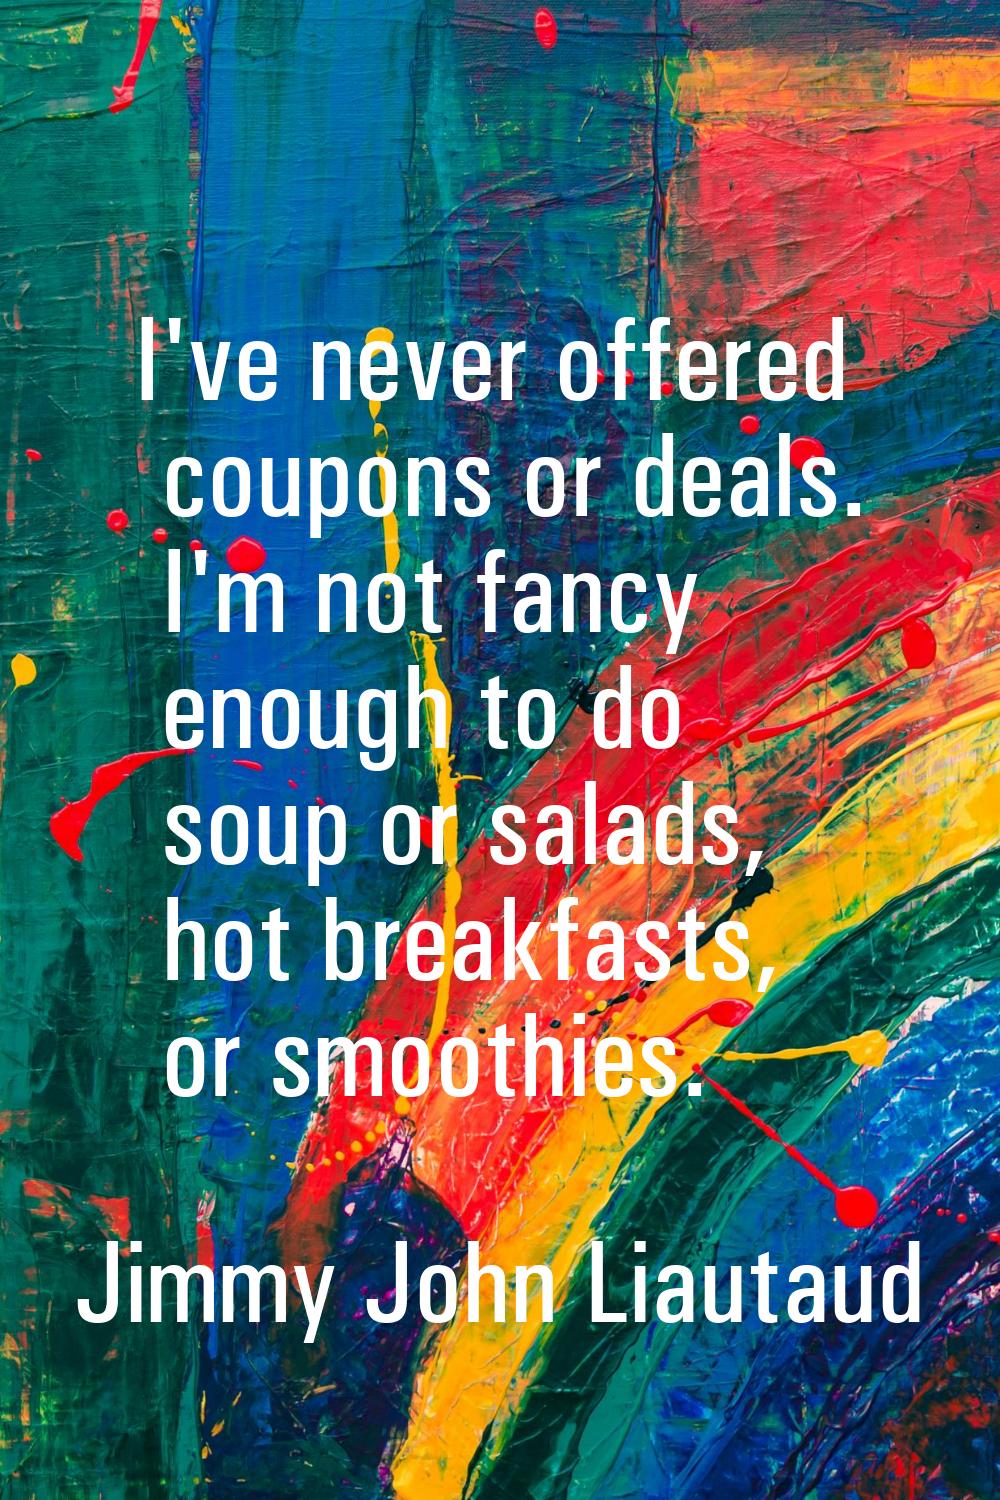 I've never offered coupons or deals. I'm not fancy enough to do soup or salads, hot breakfasts, or 